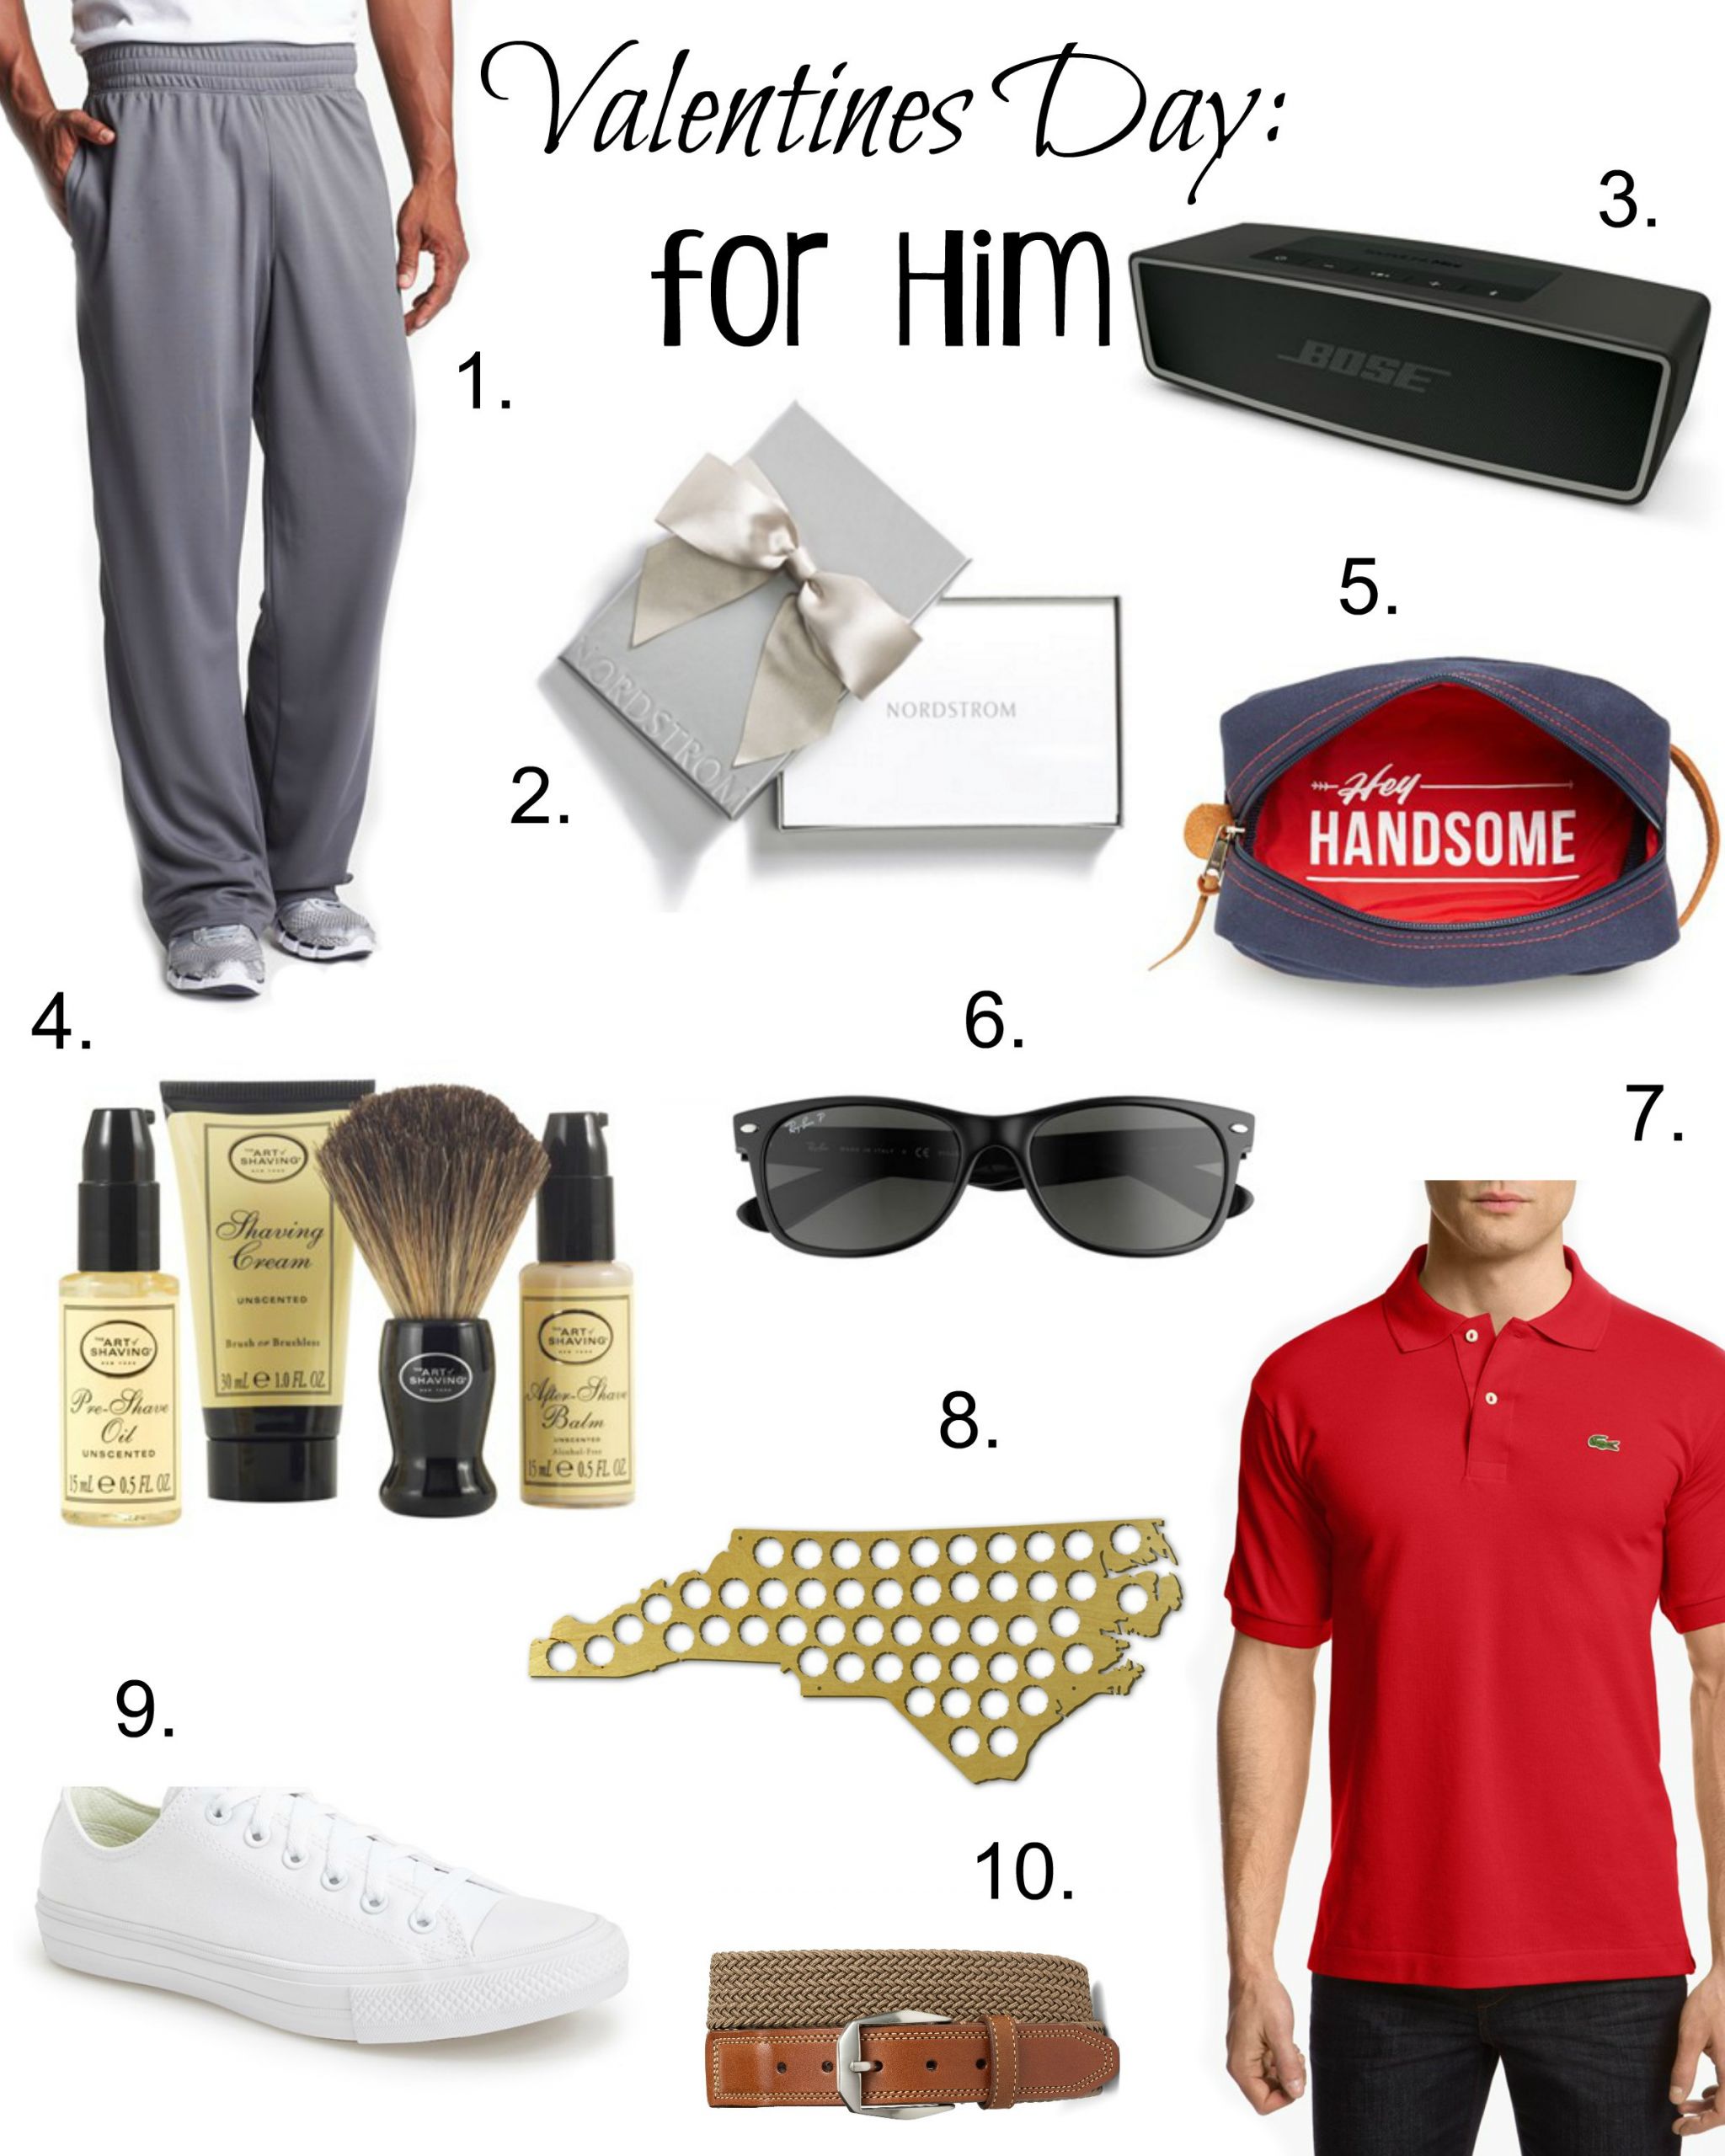 Good Valentines Day Gifts For Men
 Top 10 Valentines Day Gifts For Him